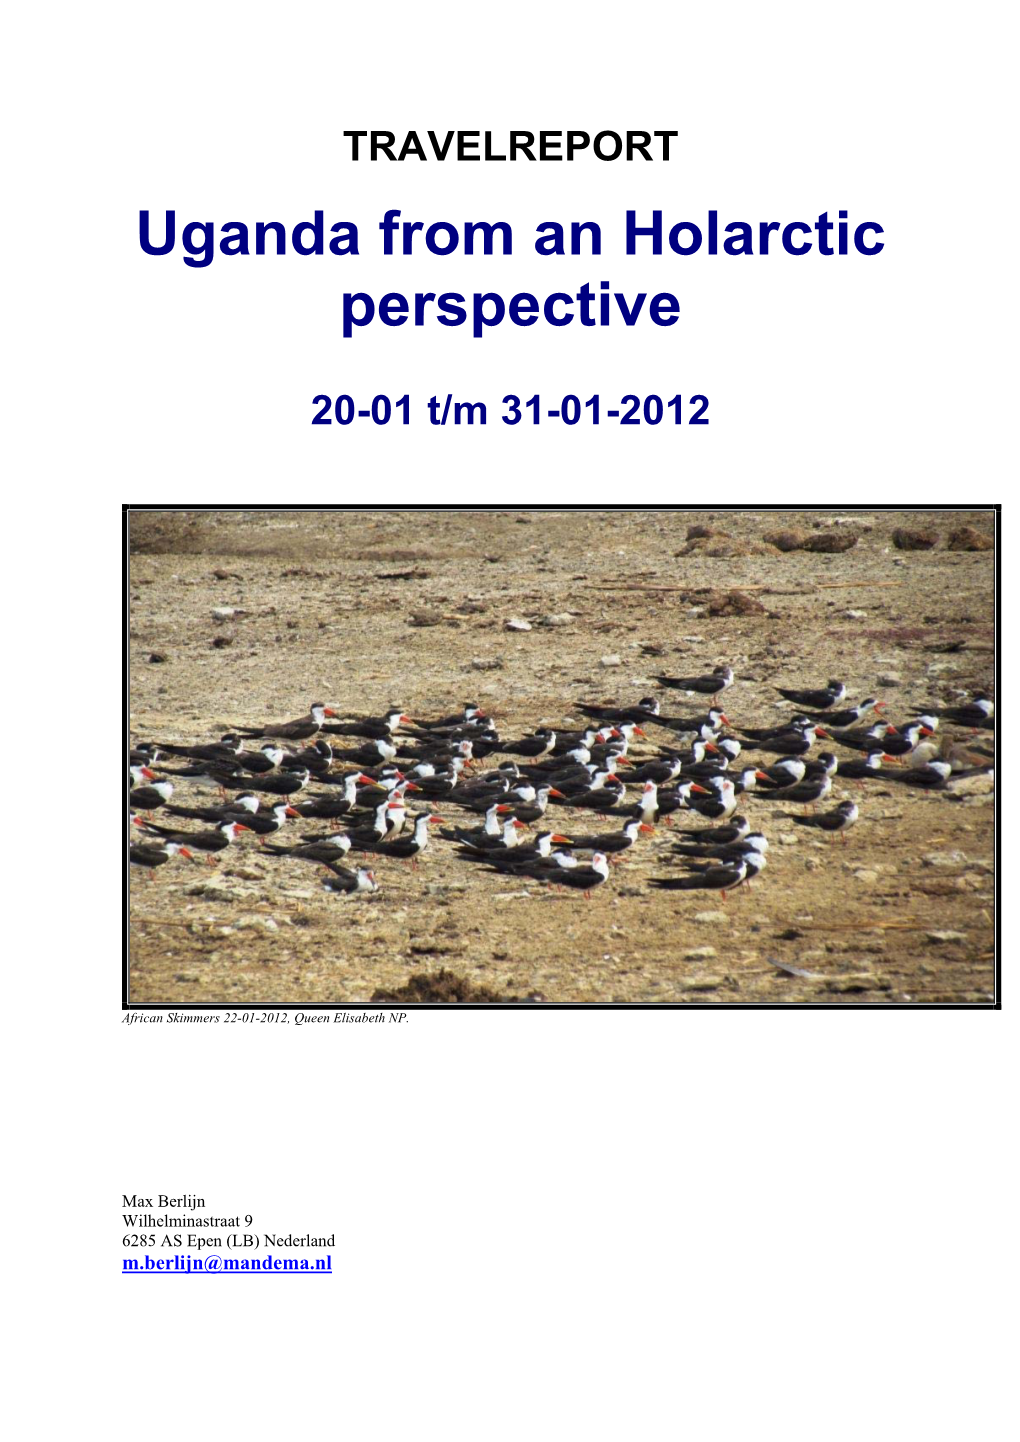 Uganda from an Holarctic Perspective